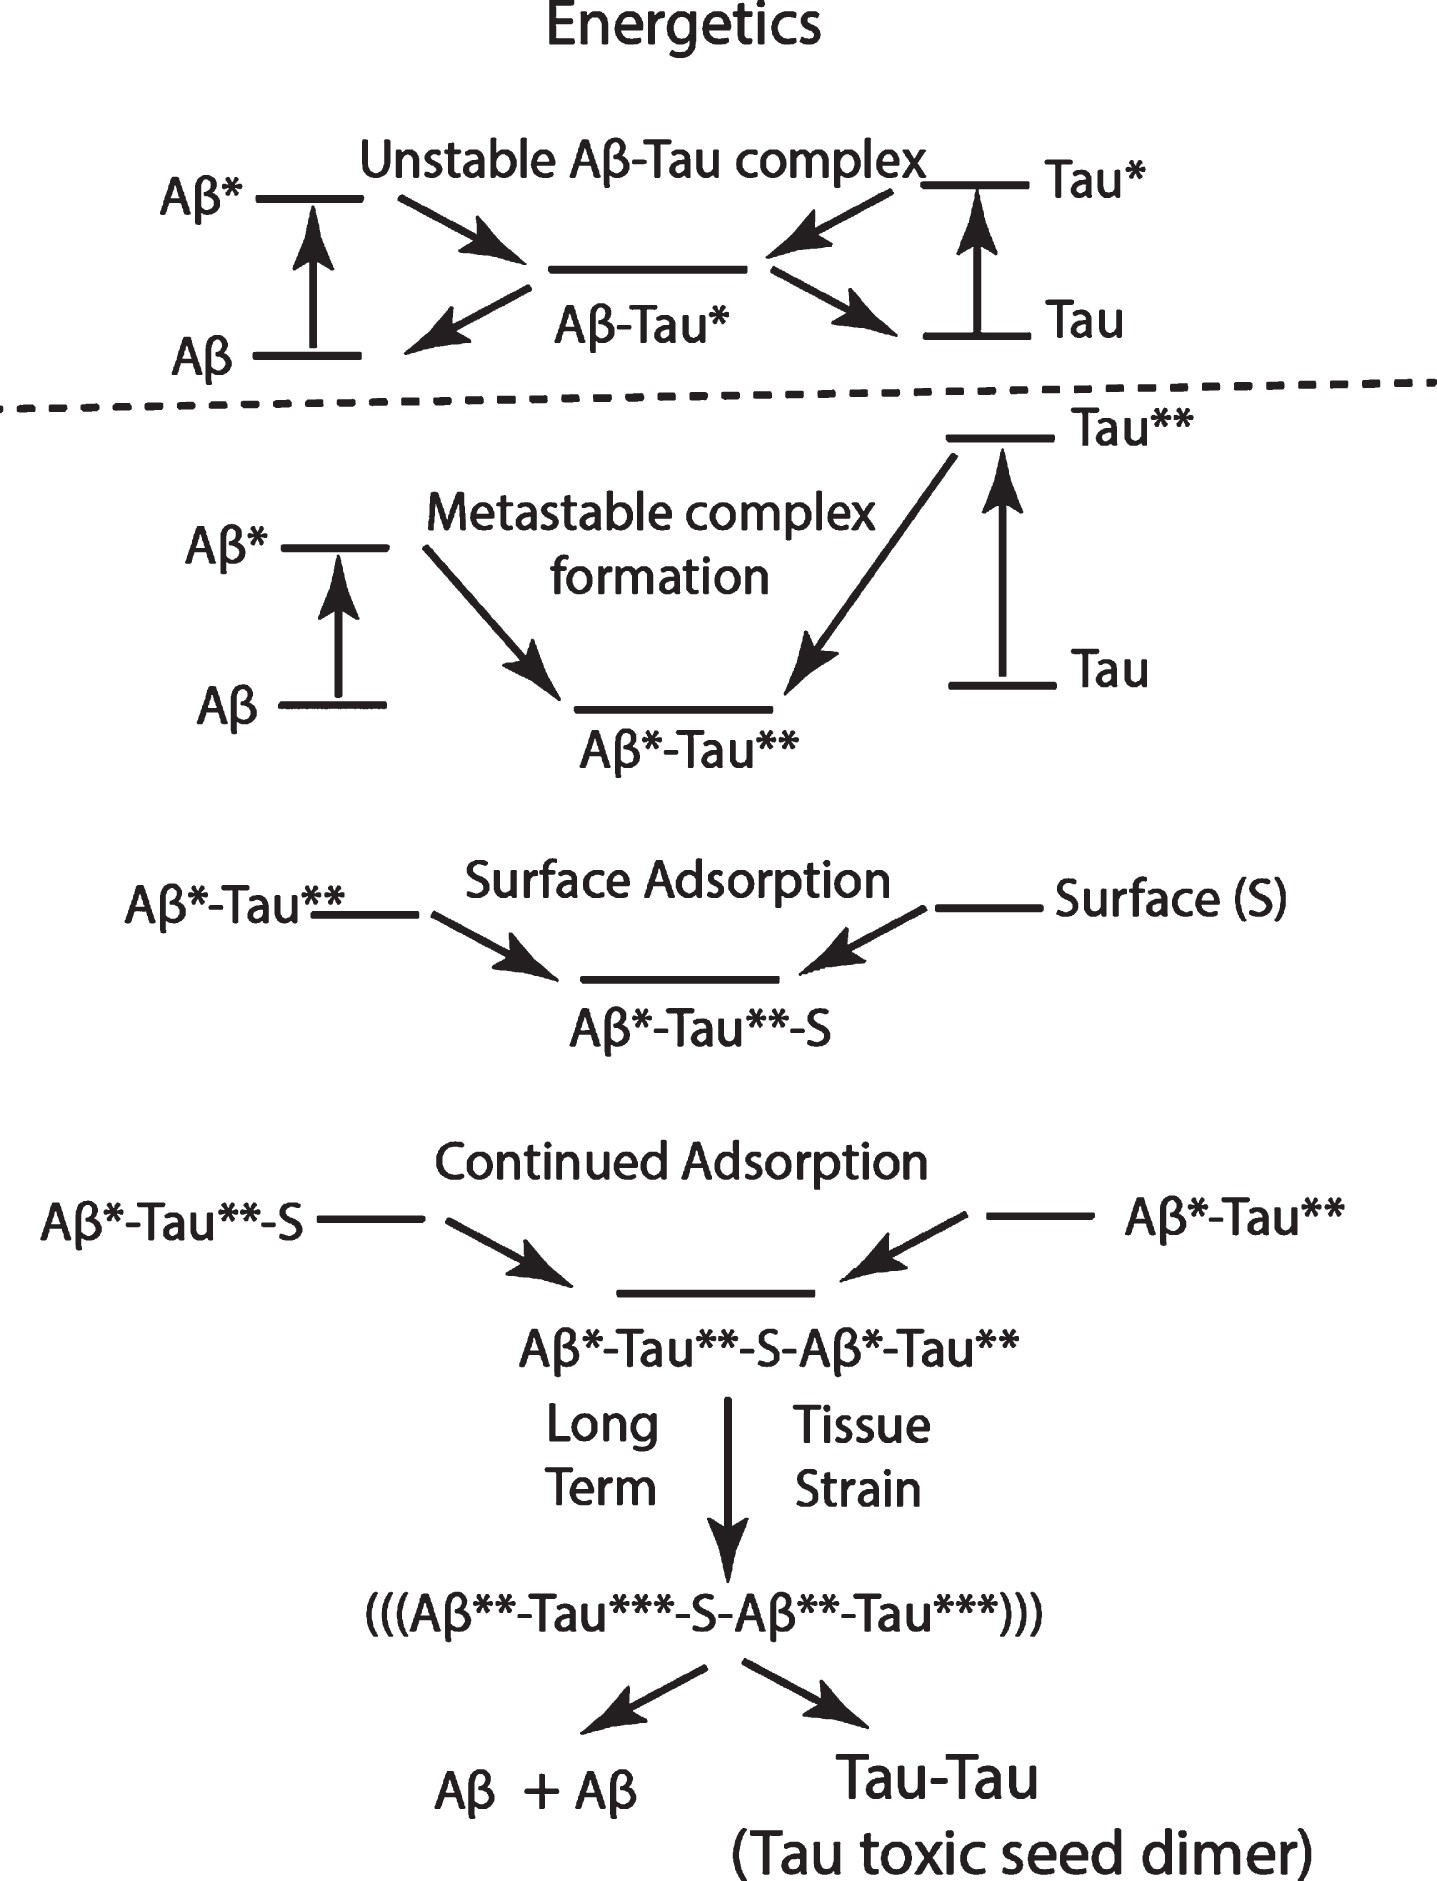 Suggested schematic of energetics of the sequence of events showing the flow stress-induced stretching of Aβ and tau molecules (Aβ * and Tau**), followed by the formation of an Aβ*-Tau** dimer, which is adsorbed on a membrane surface S, followed by the adsorption of another Aβ*-Tau** dimer, and finally, following long exposure to tissue strain in a cistern “hot zone,” with the formation of a thermodynamically more stable, surface-adsorbed toxic tau dimer. The released Aβ can be dissolved in CSF and eliminated. This same mechanism may be proposed for both CTE and AD, but with the extensional stress energy of both Aβ* and Tau** higher in CTE than in AD.